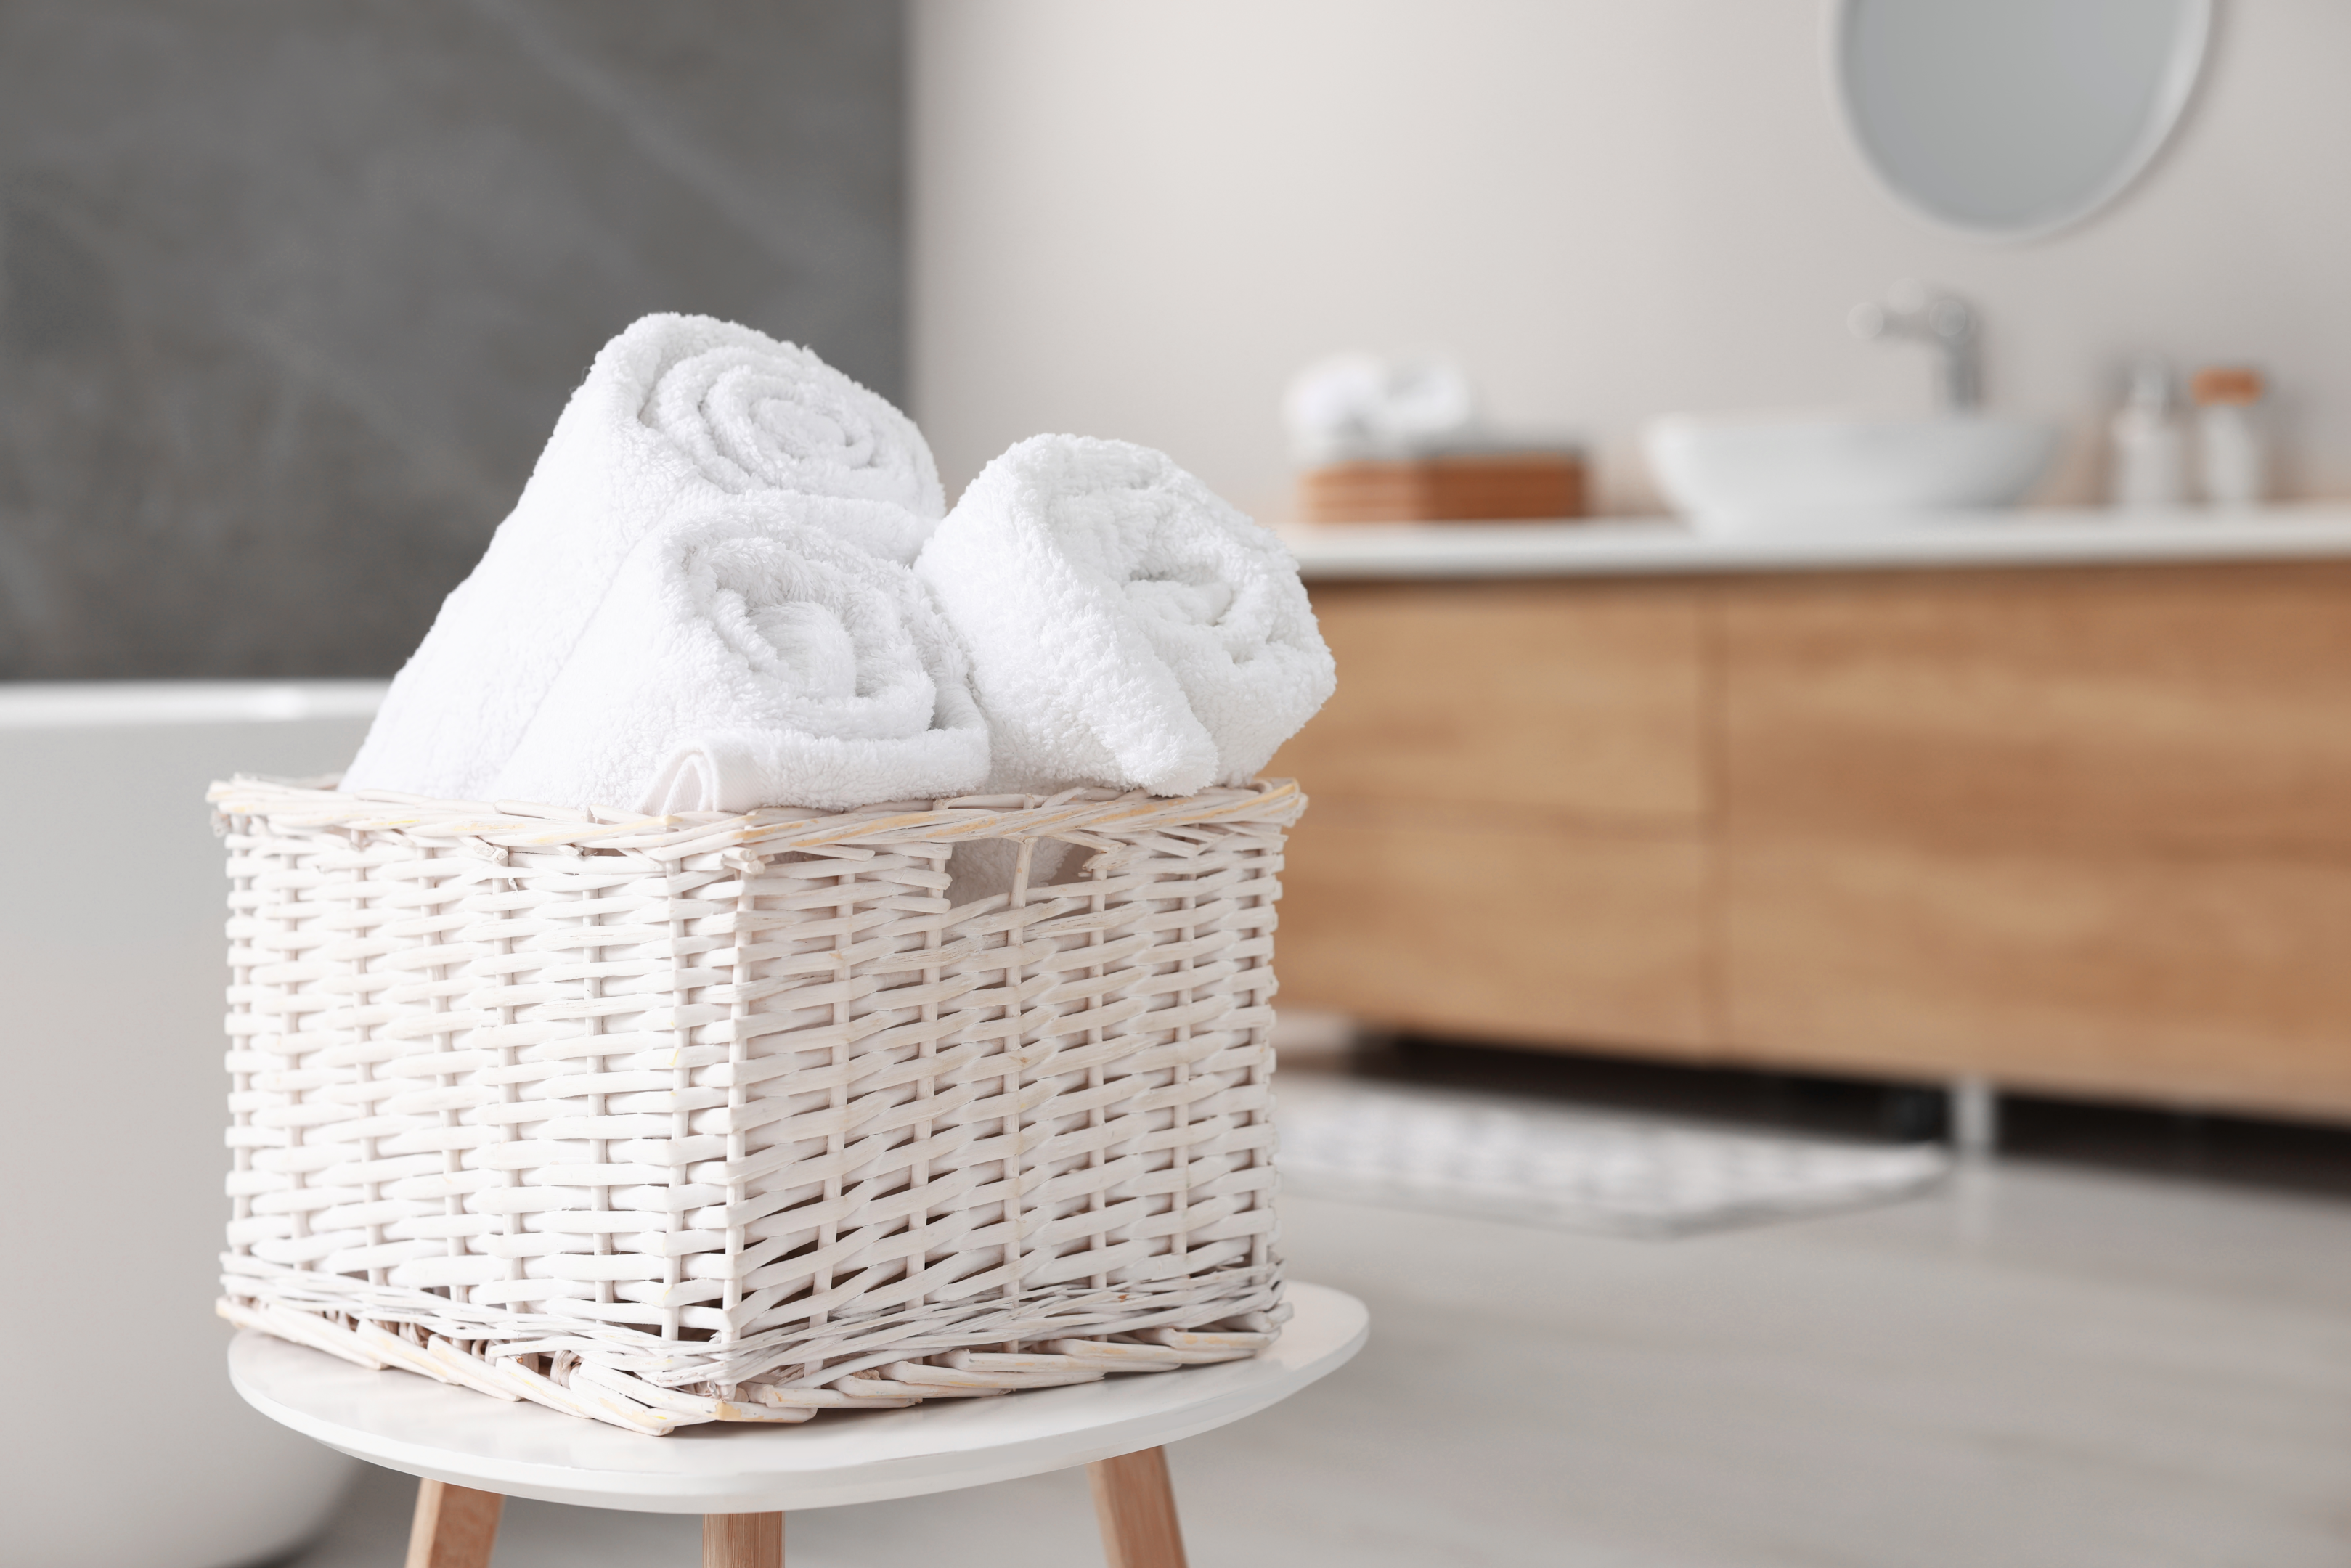 Airbnb Bathroom Essentials: A Trick Sheet for Vacation Rental Hosts